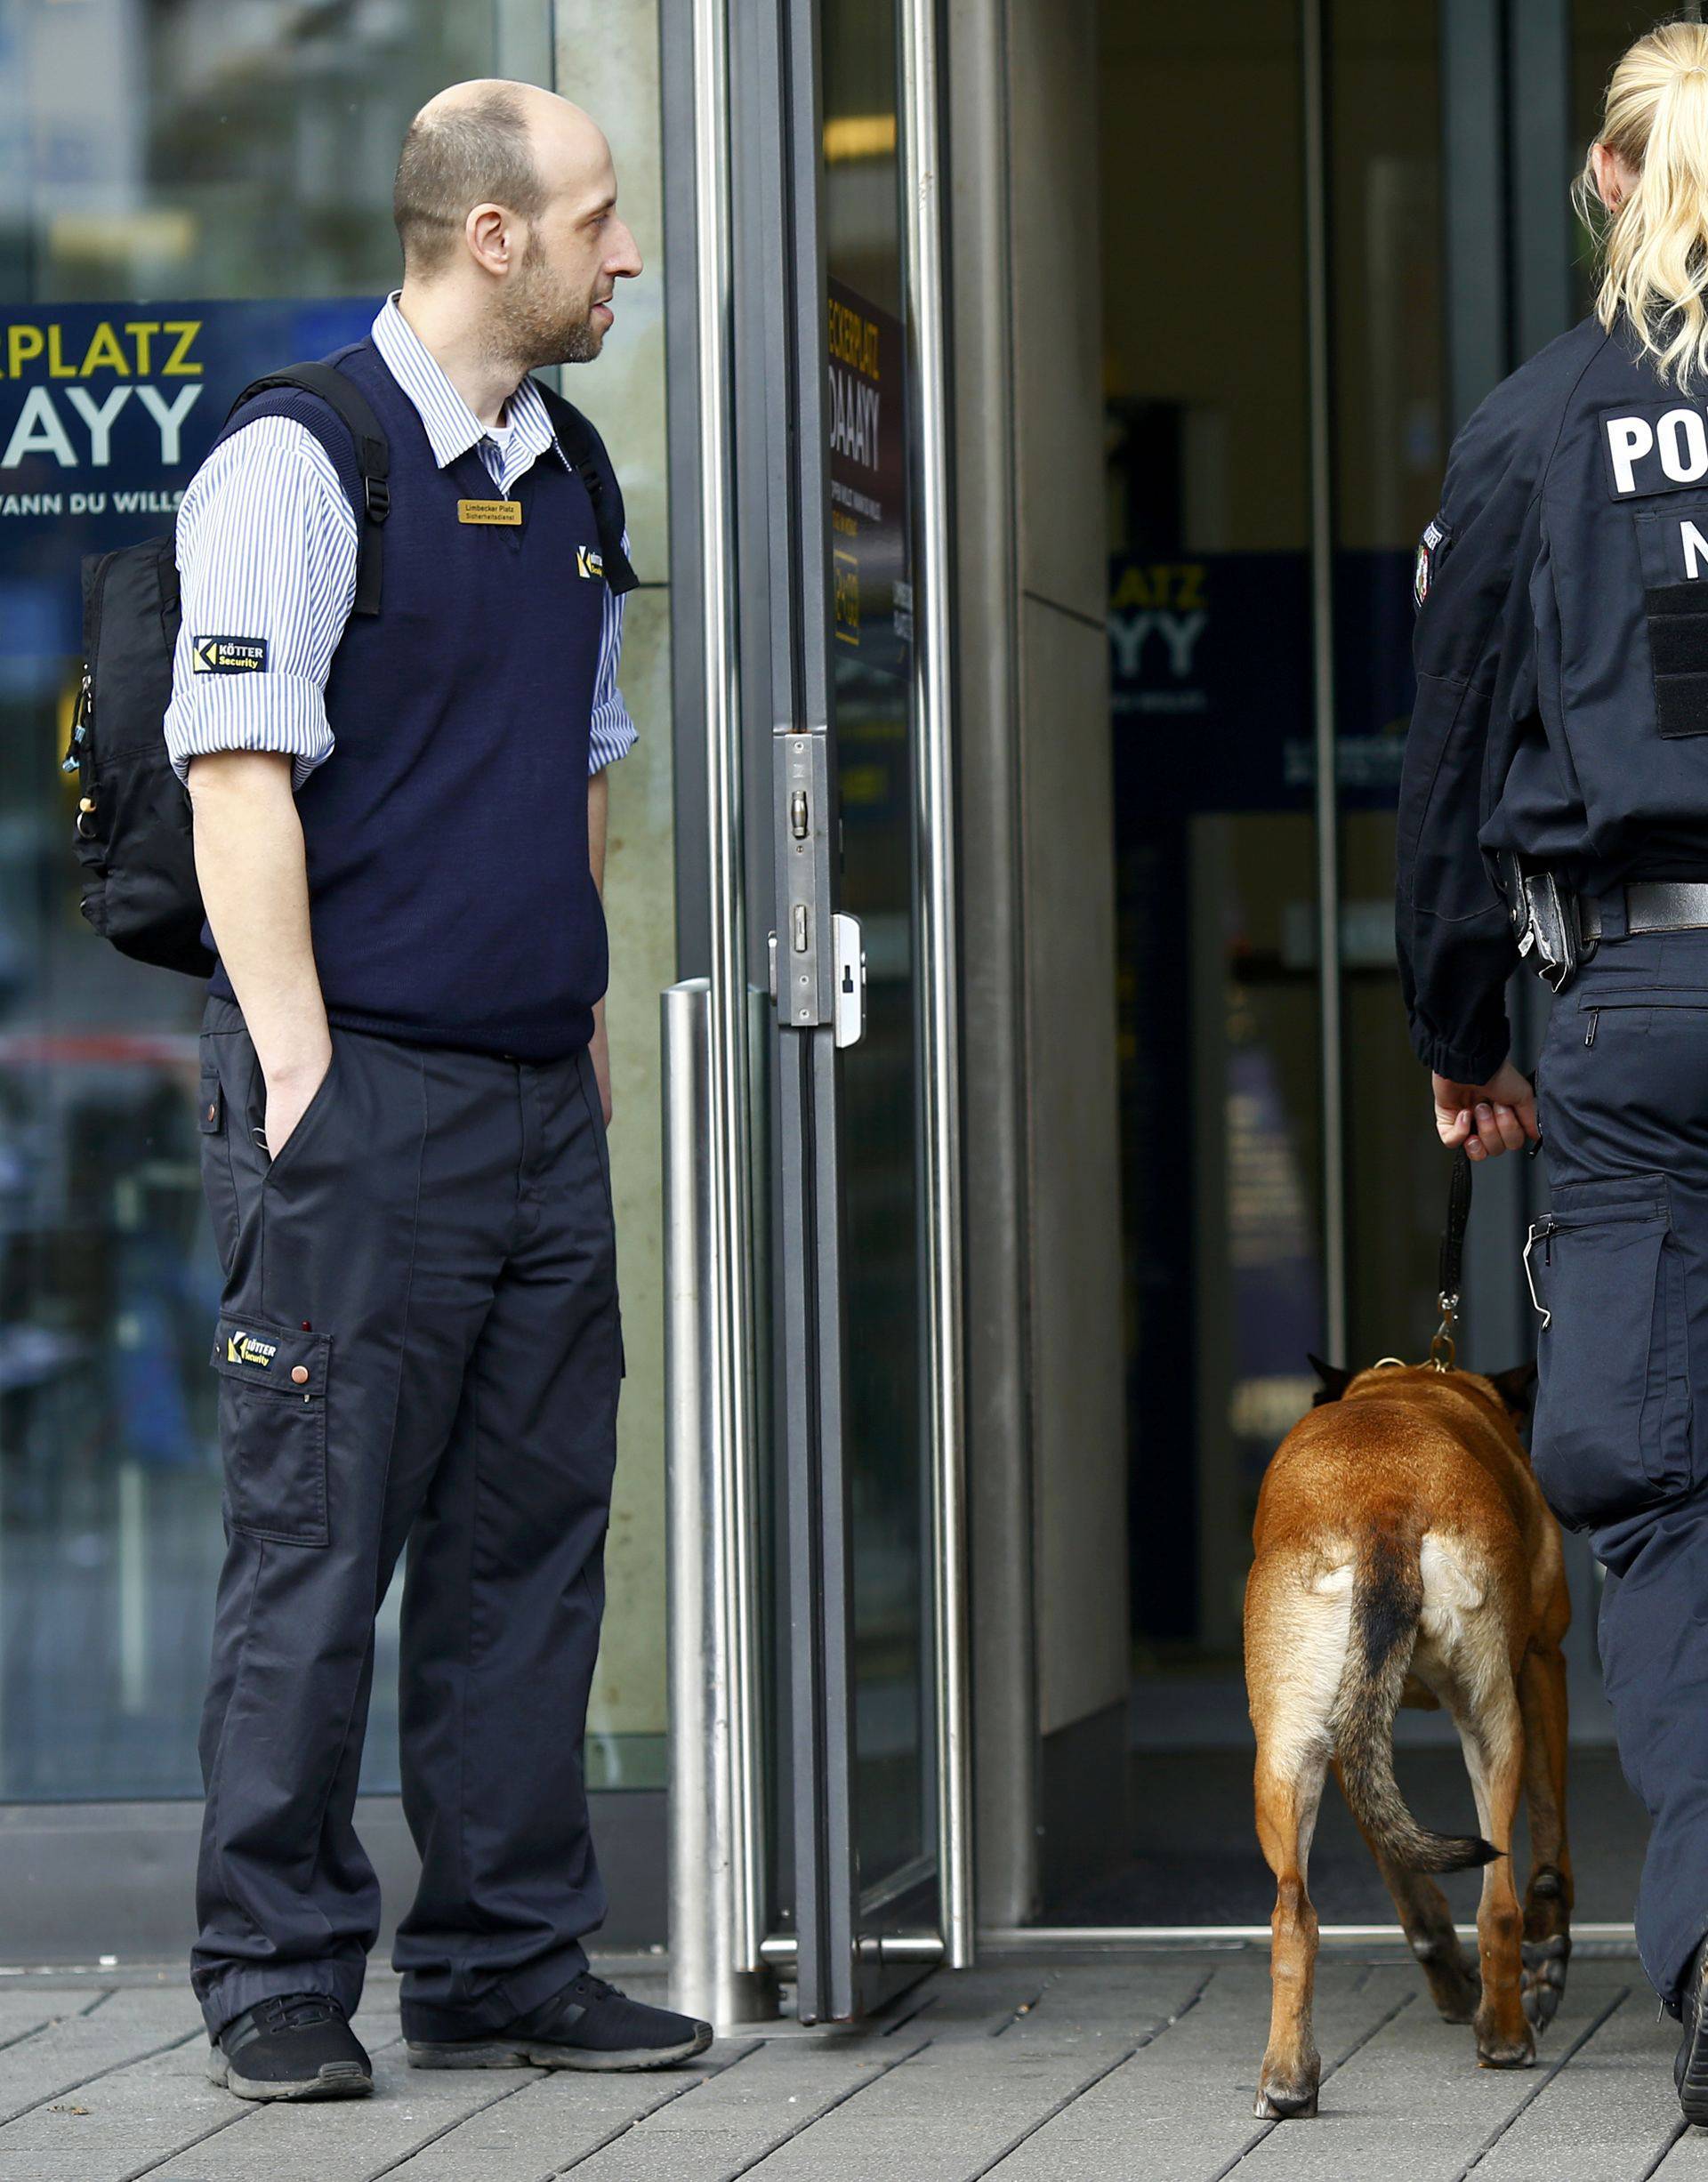 Police with a dog at the entrance of Limbecker Platz shopping mall in Essen